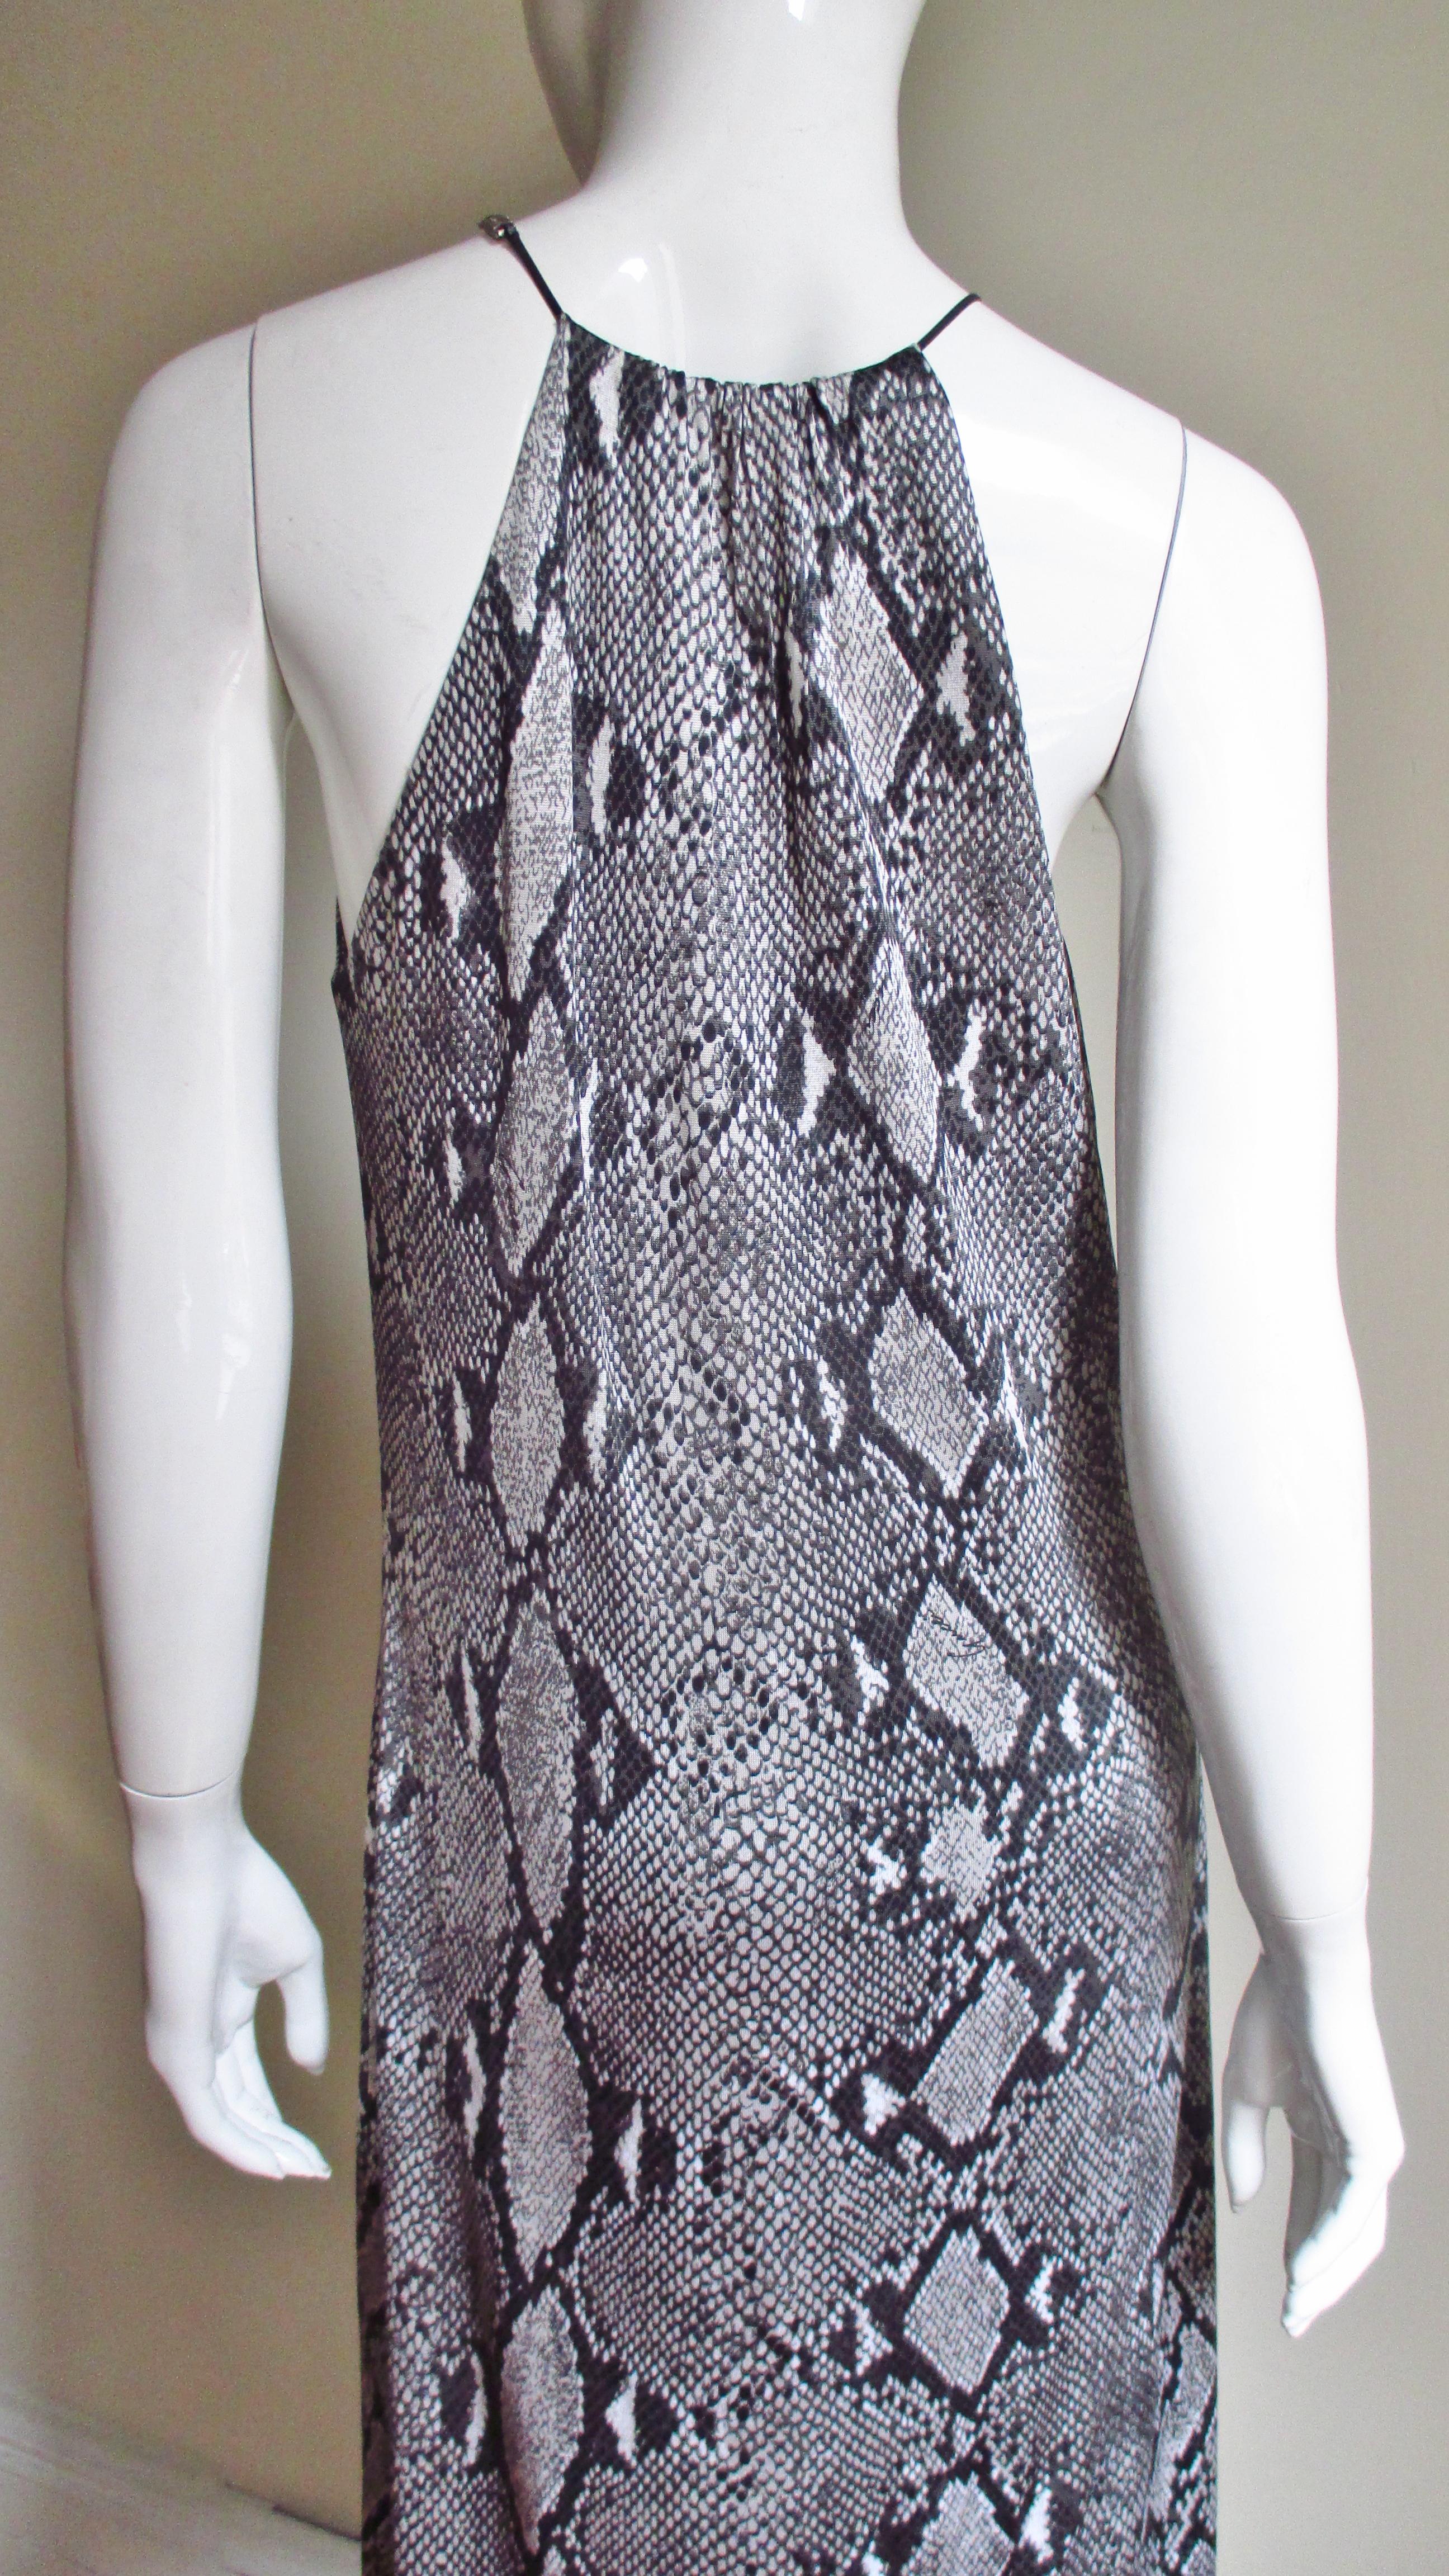 Tom Ford for Gucci Silk Python Print Dress SS 2000 For Sale 1